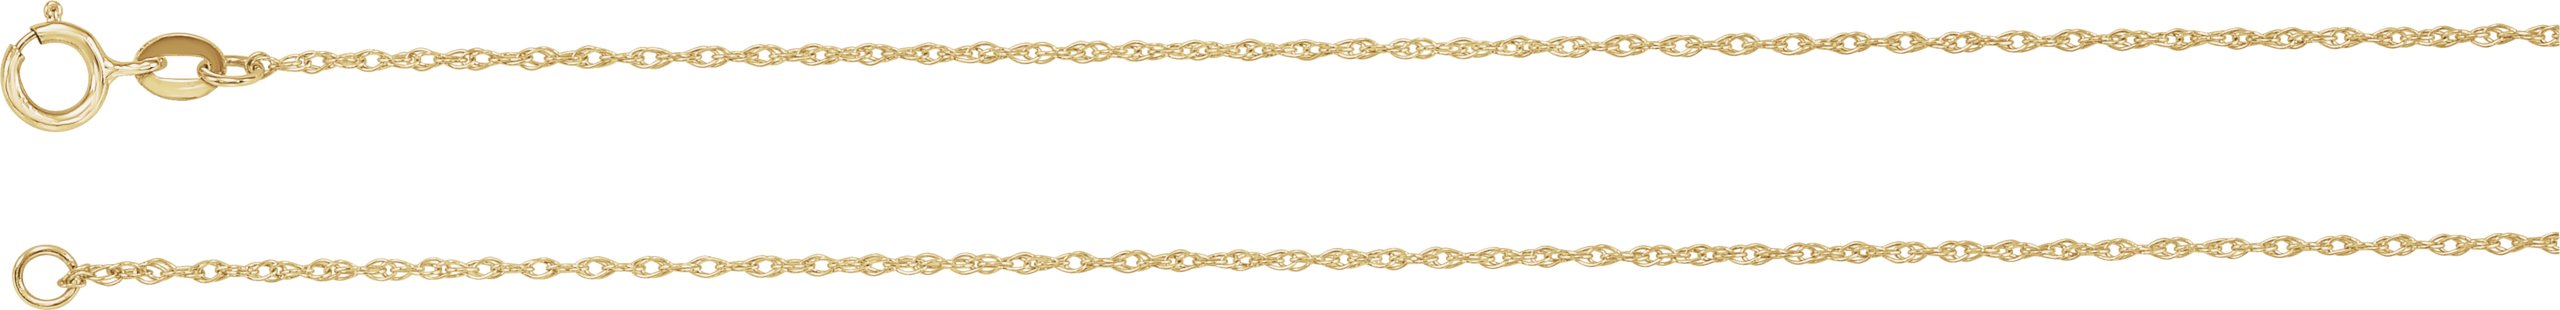 18K Yellow 1 mm Solid Rope 16 inch Chain Ref. 9879140